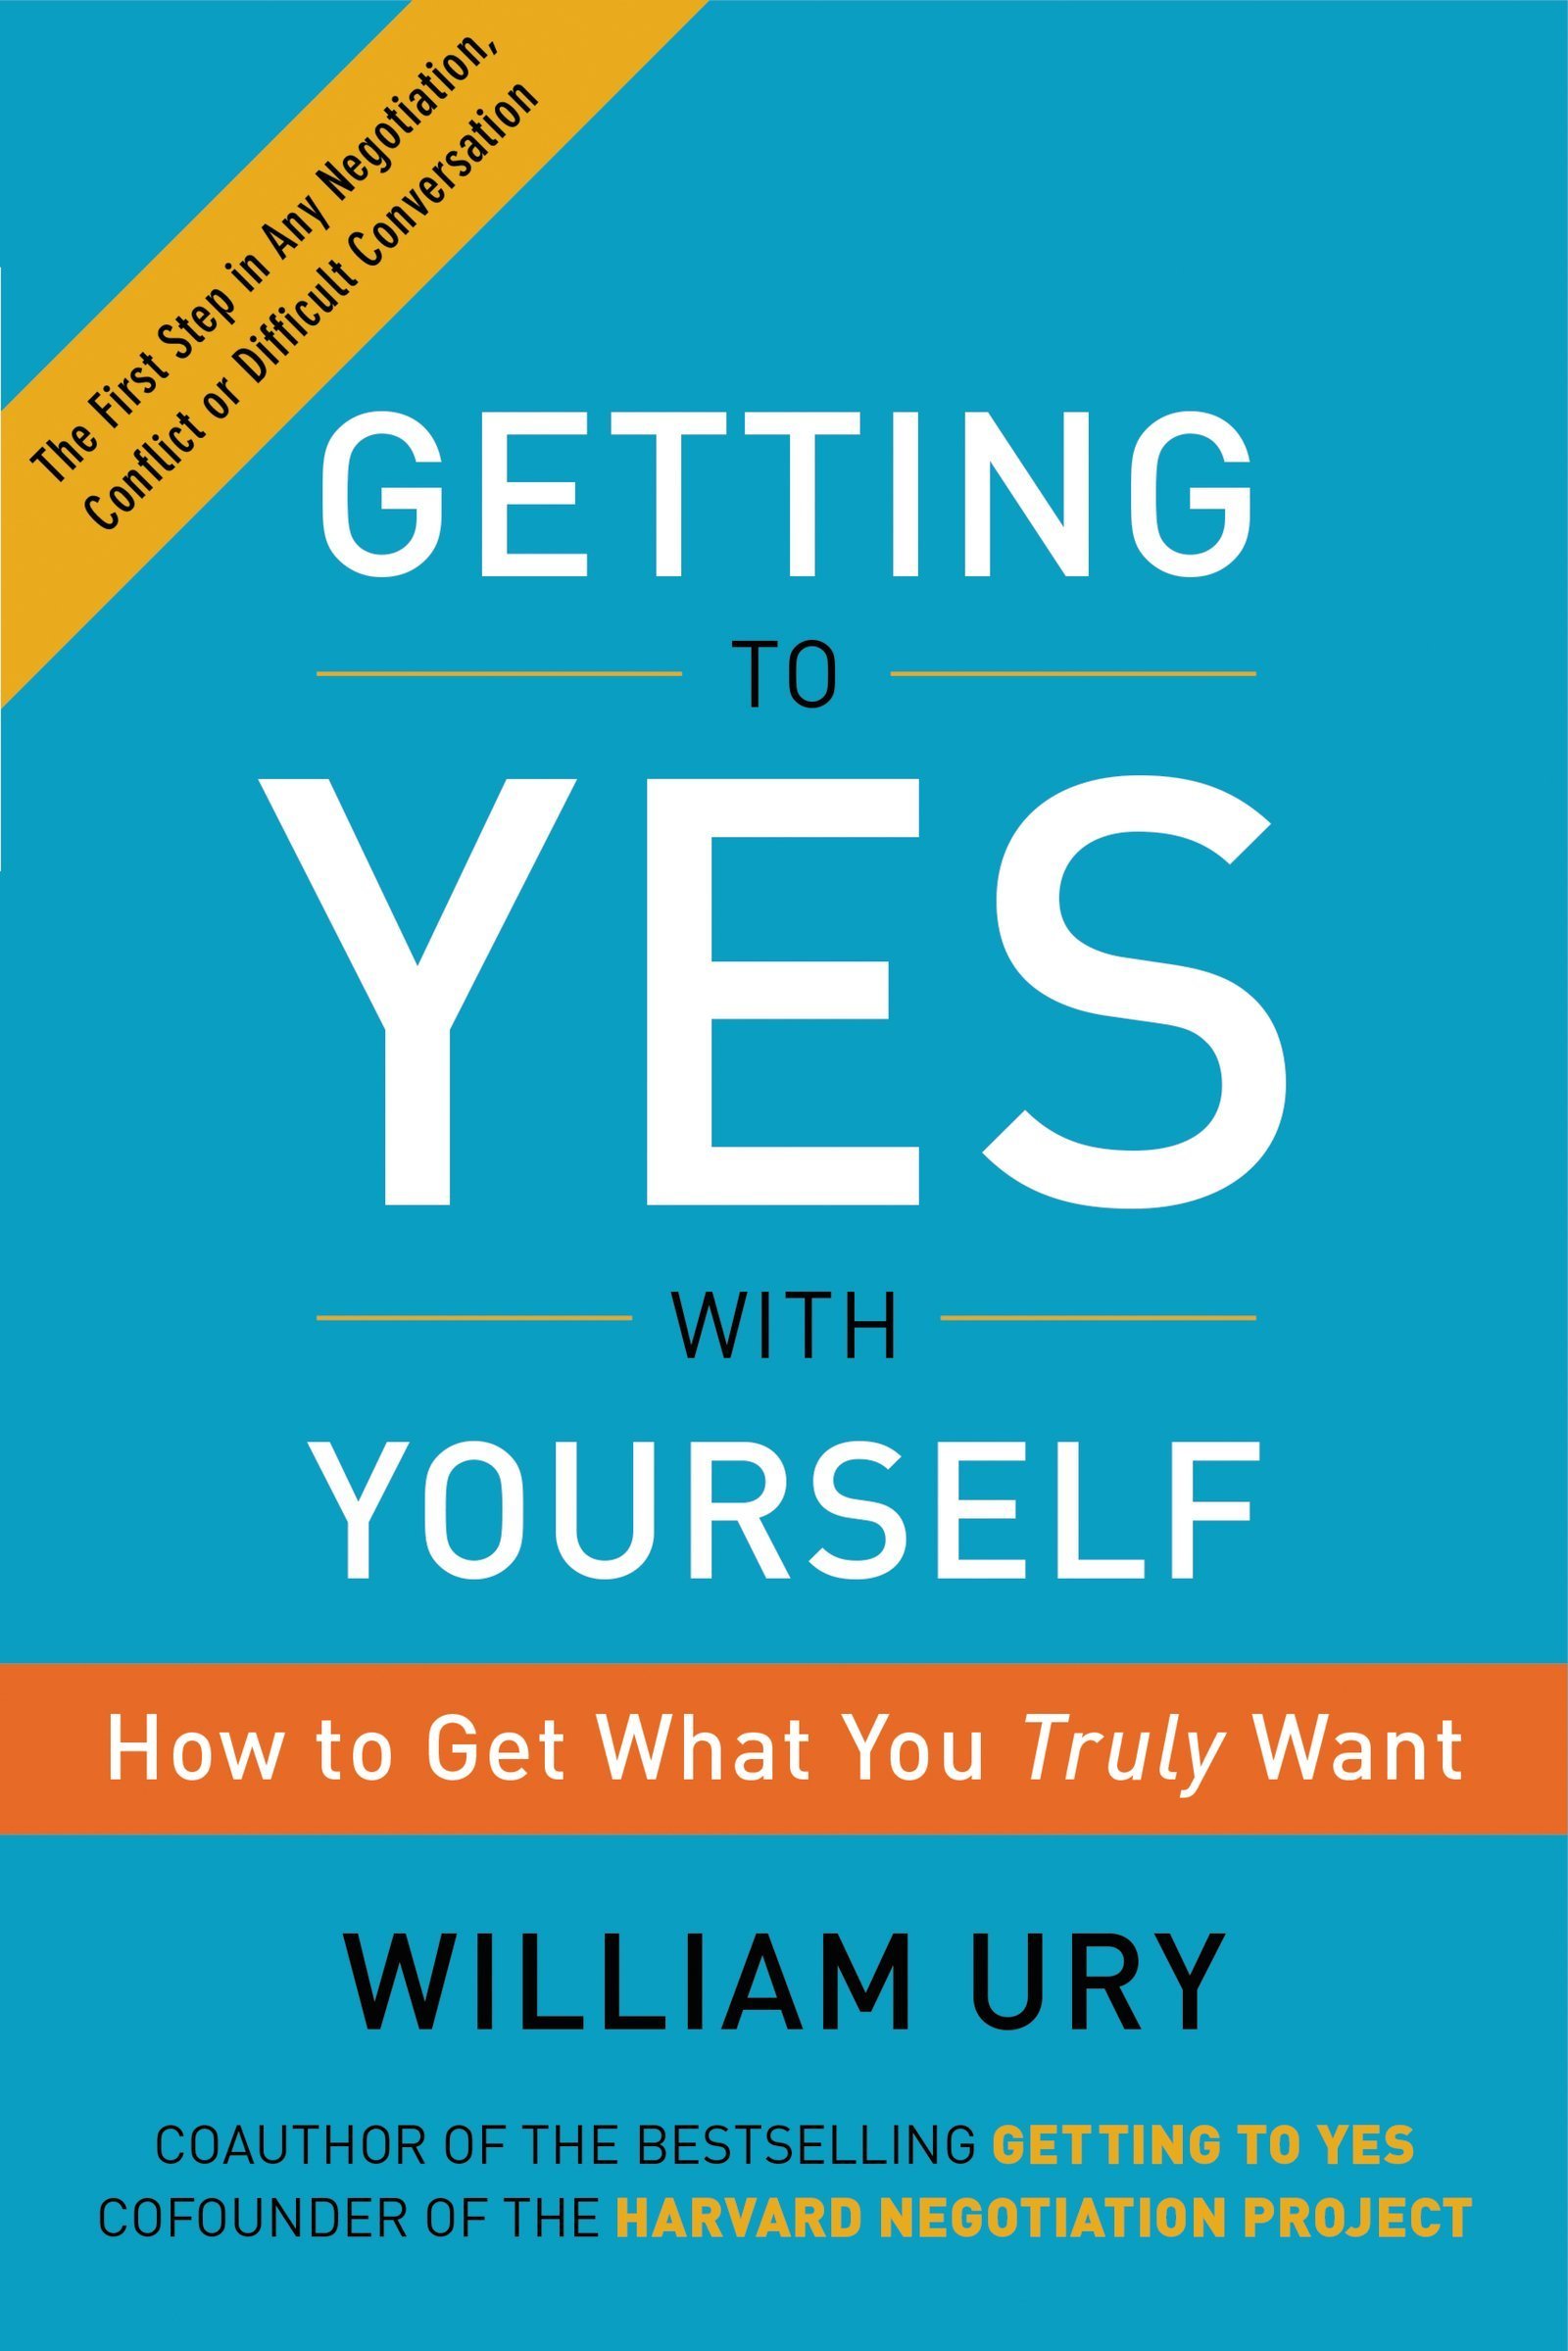 Getting to Yes with Yourself | William Ury